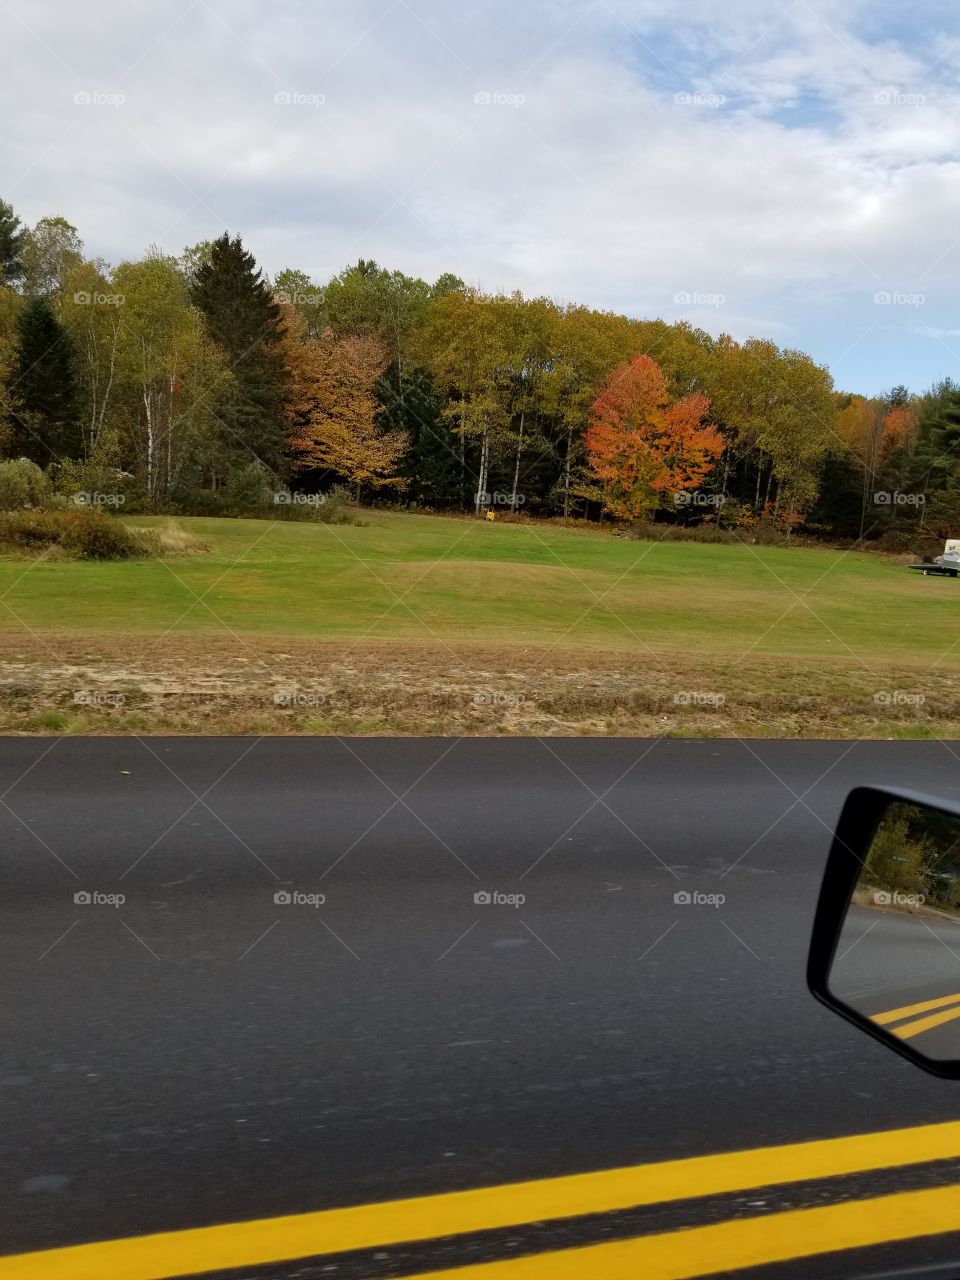 Leaf peeping in the fall while driving